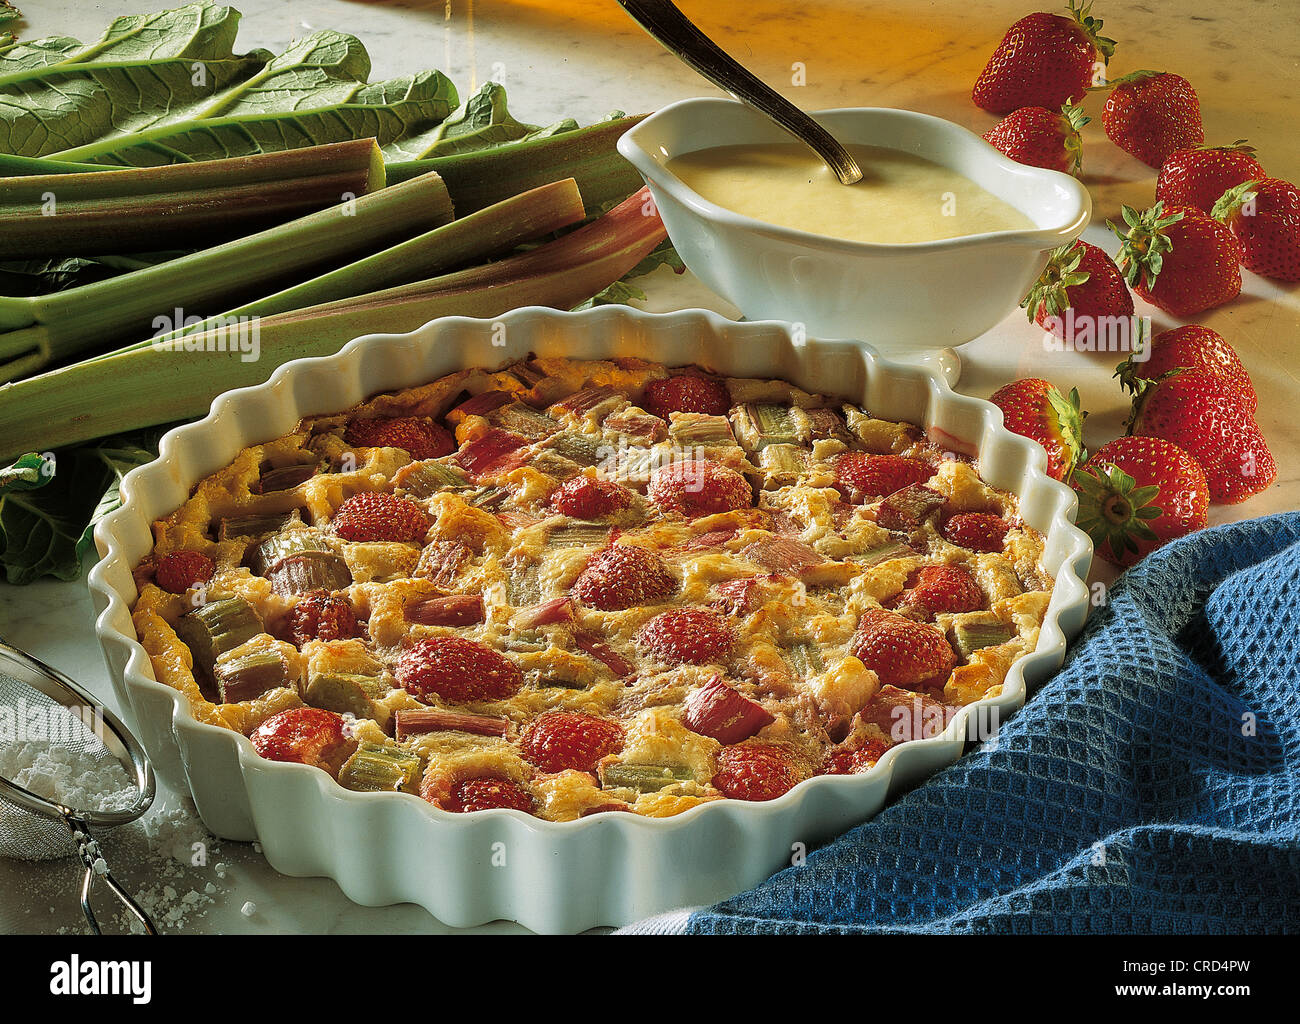 Rhubarb gratin with strawberries, France. Stock Photo